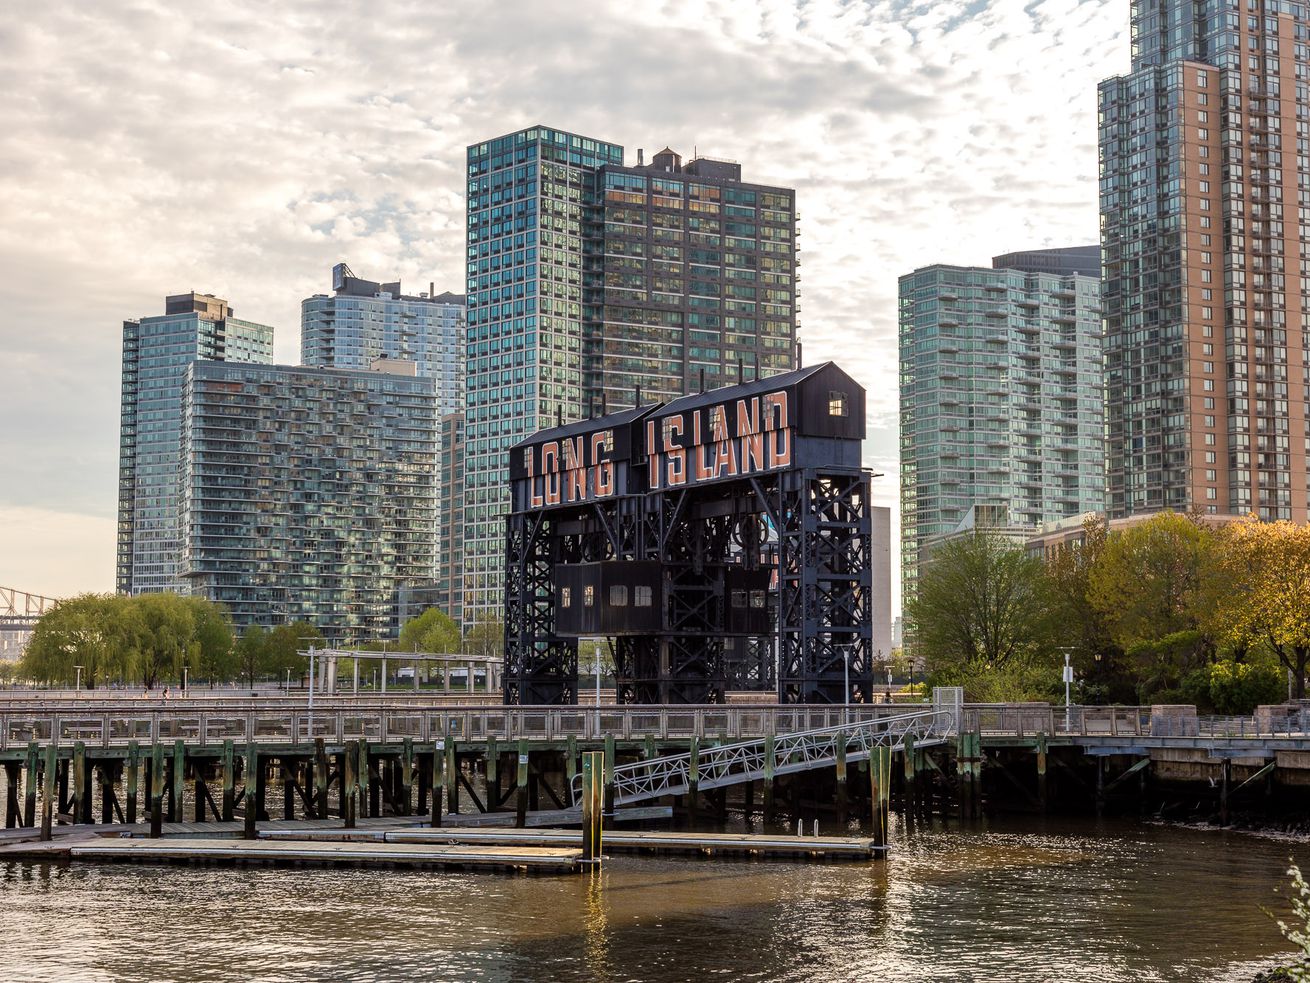 The waterfront in Long Island City. There is a pier with a sign that reads: Long Island. Behind the sign are many tall apartment buildings.